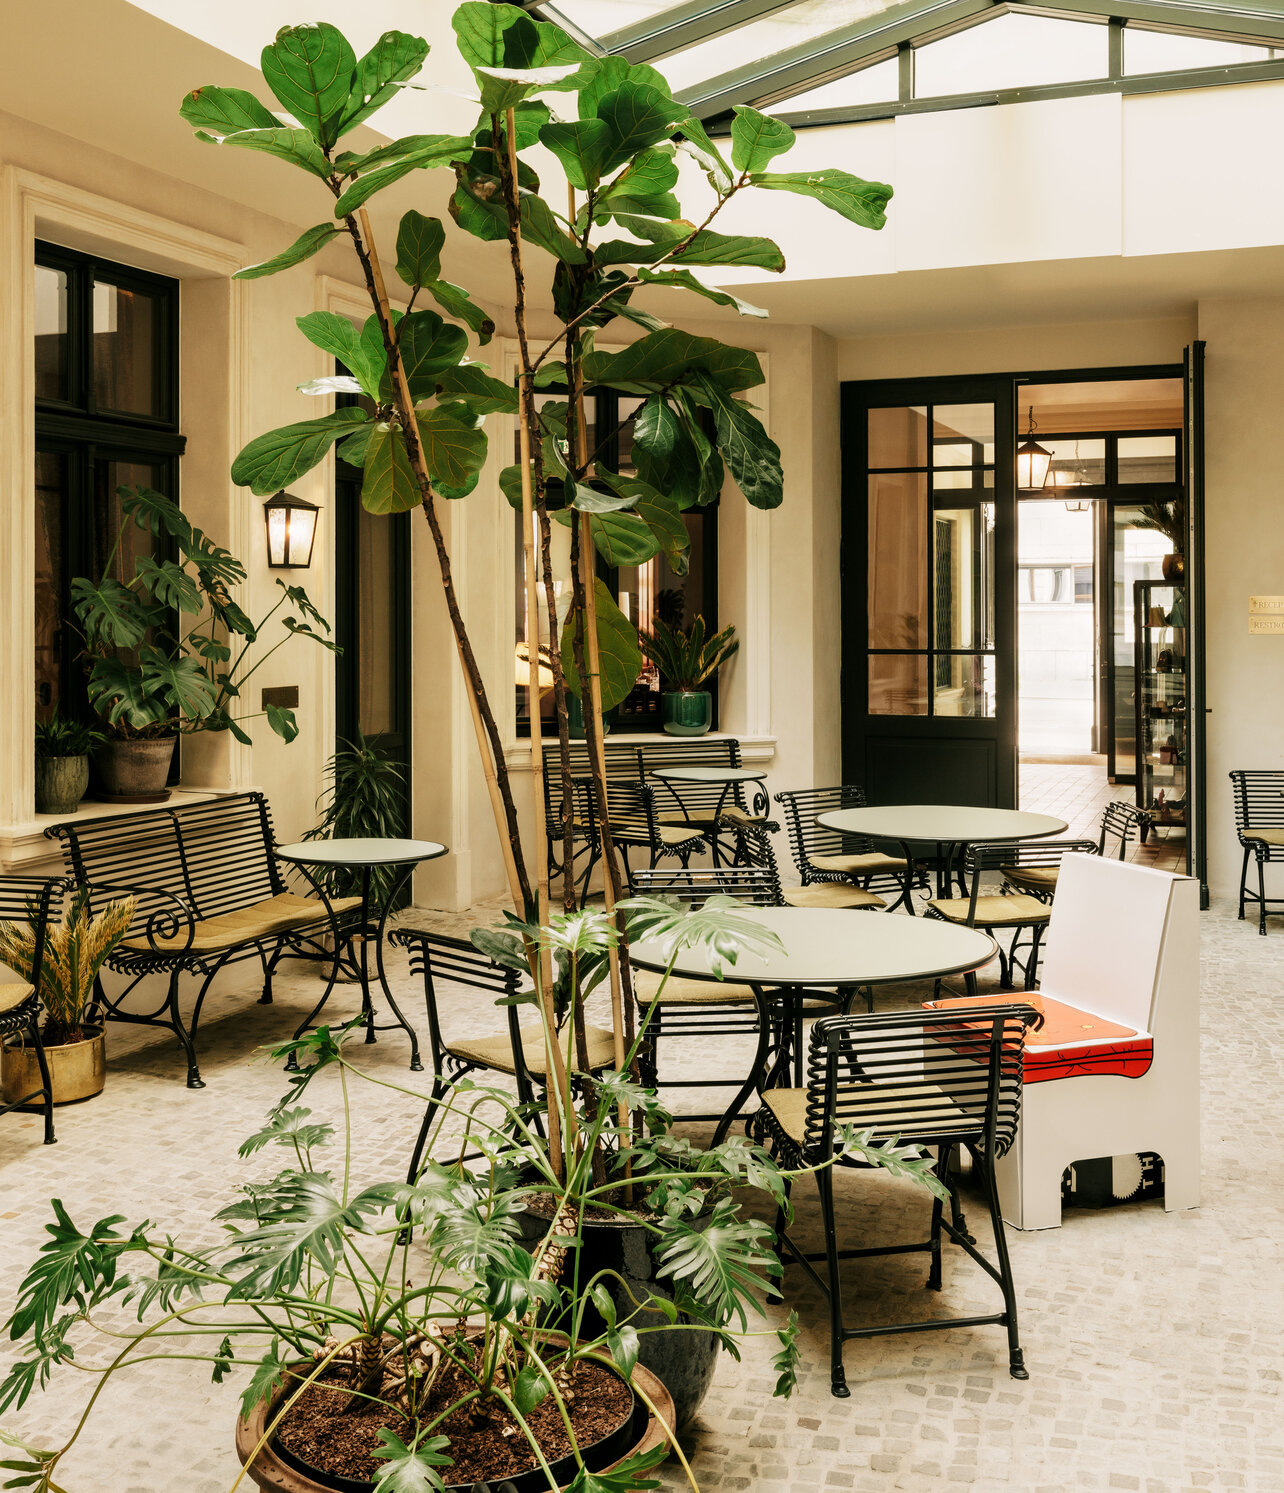 The light-flooded winter garden of the boutique hotel Château Royal Berlin with elegant terrace furniture and decorated with various exotic plants